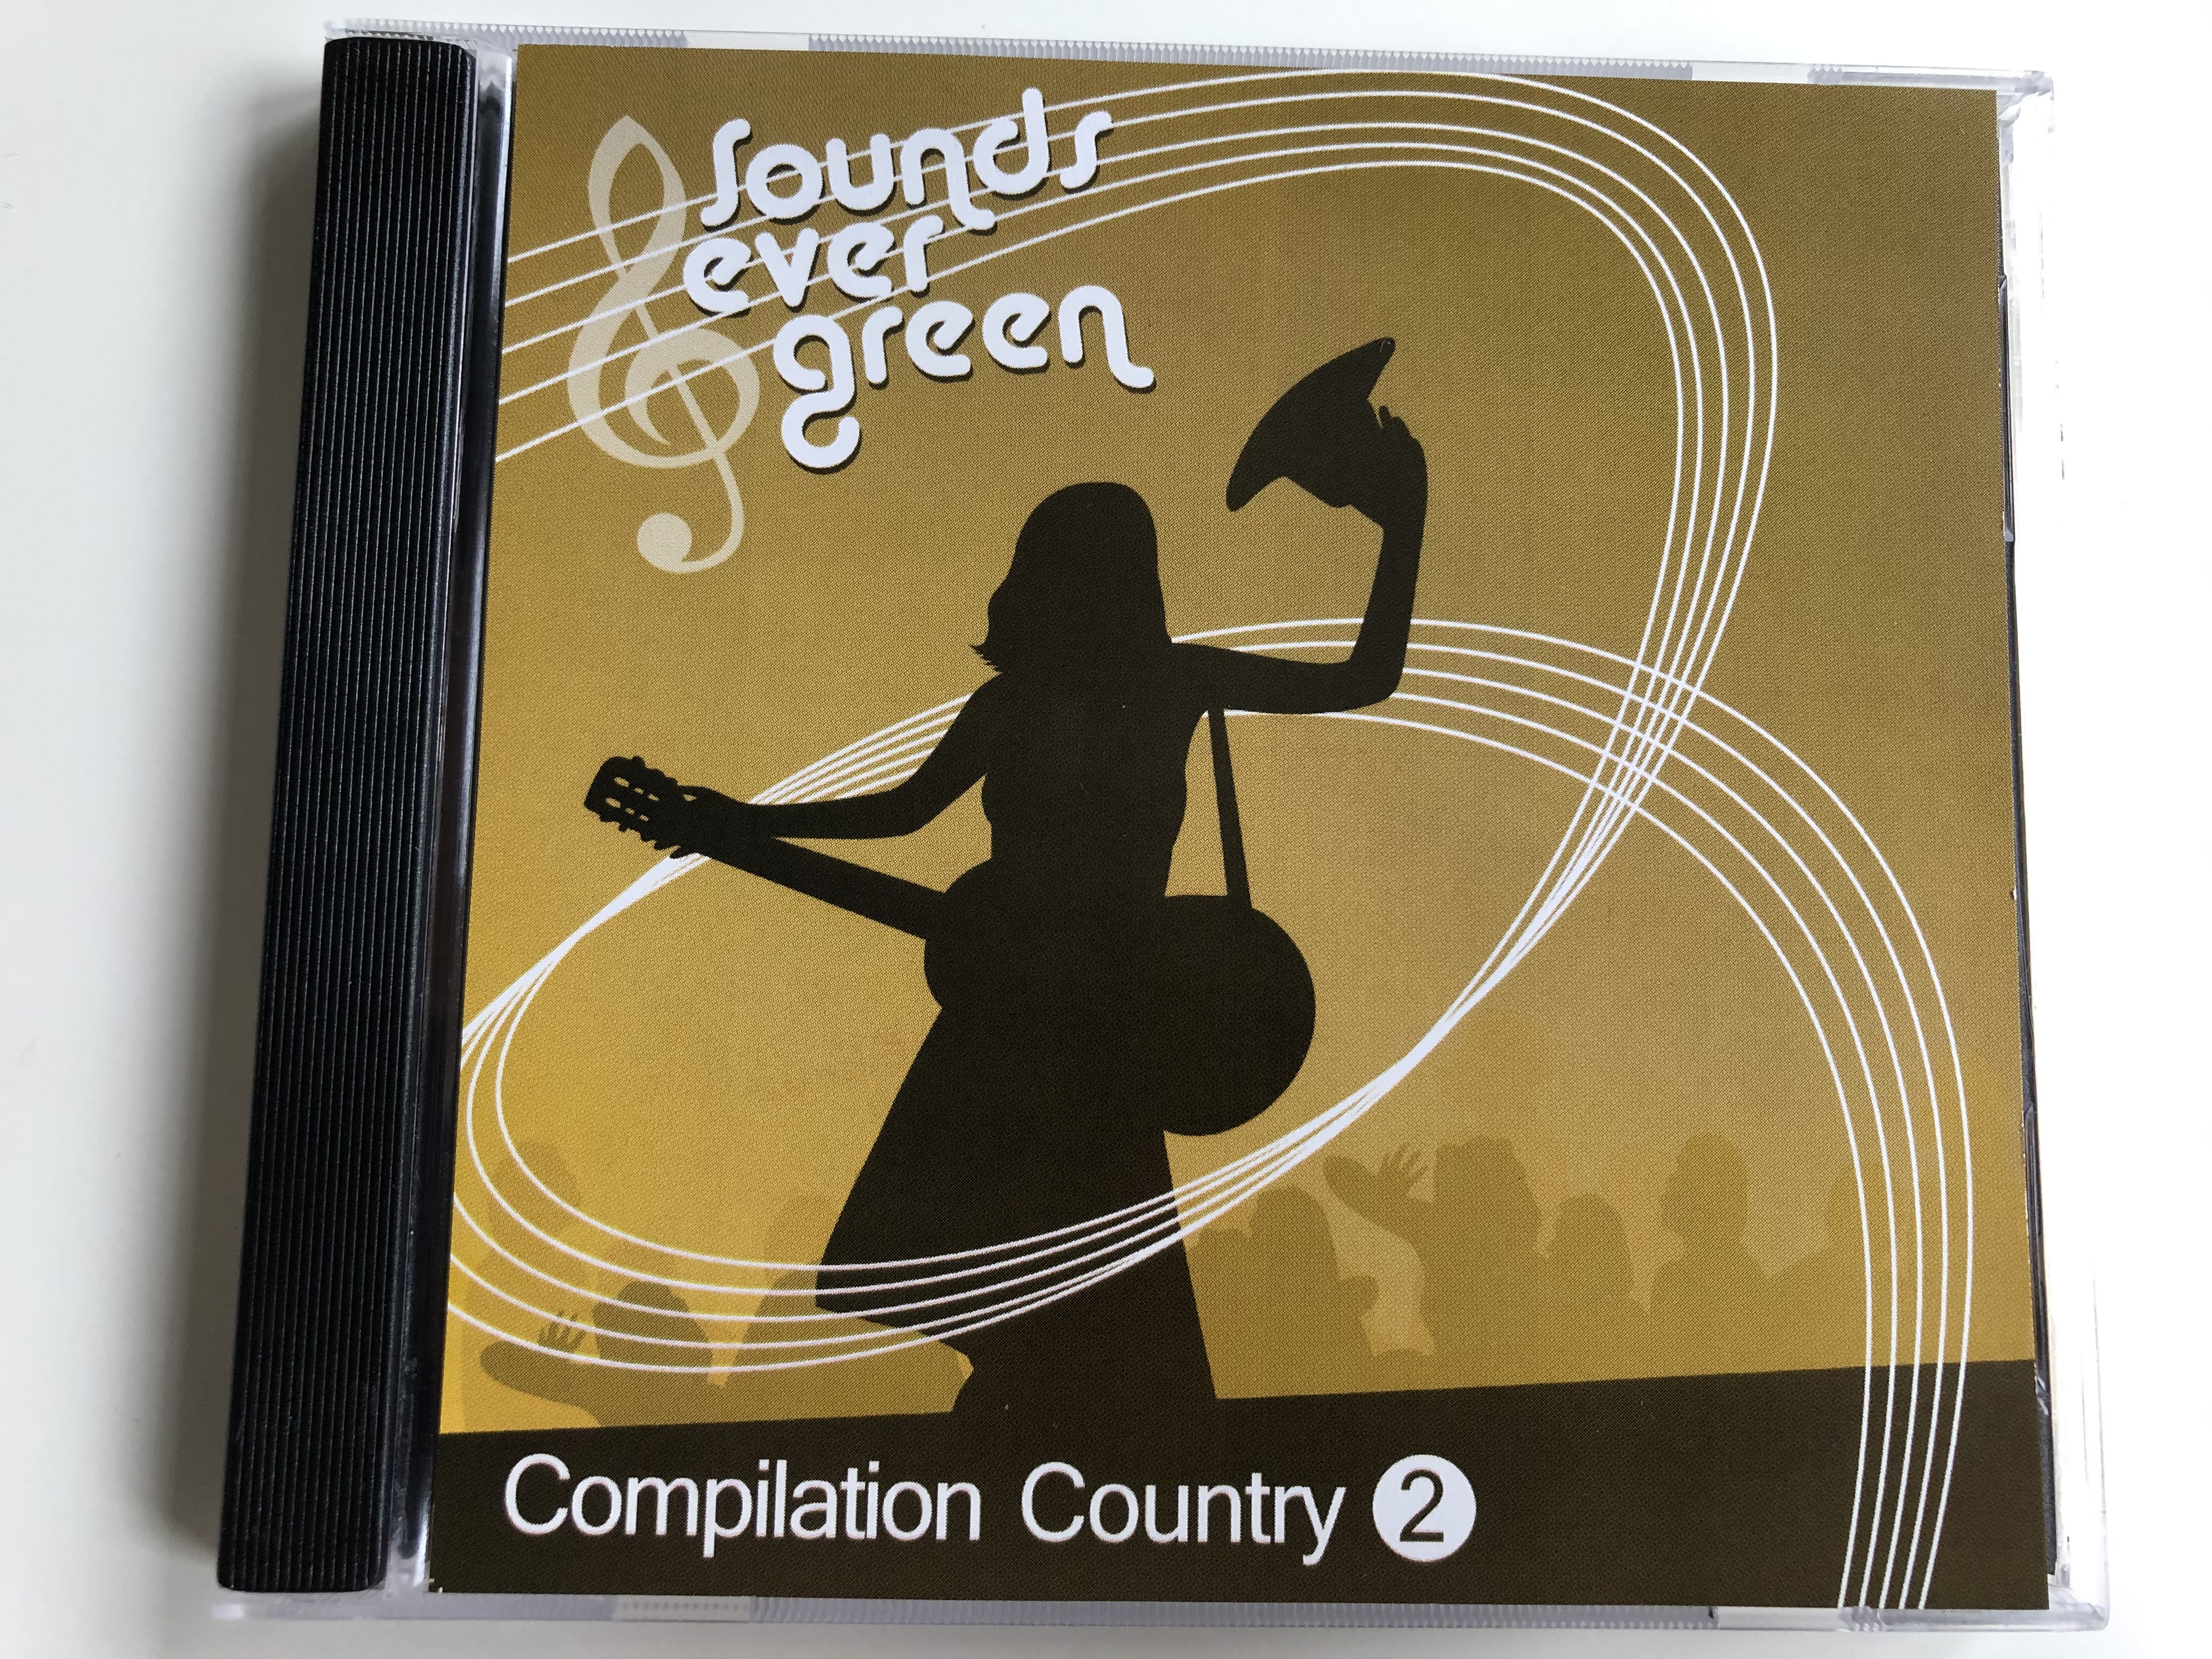 sounds-ever-green-compilation-country-2-audio-cd-2007-nico008-1-.jpg